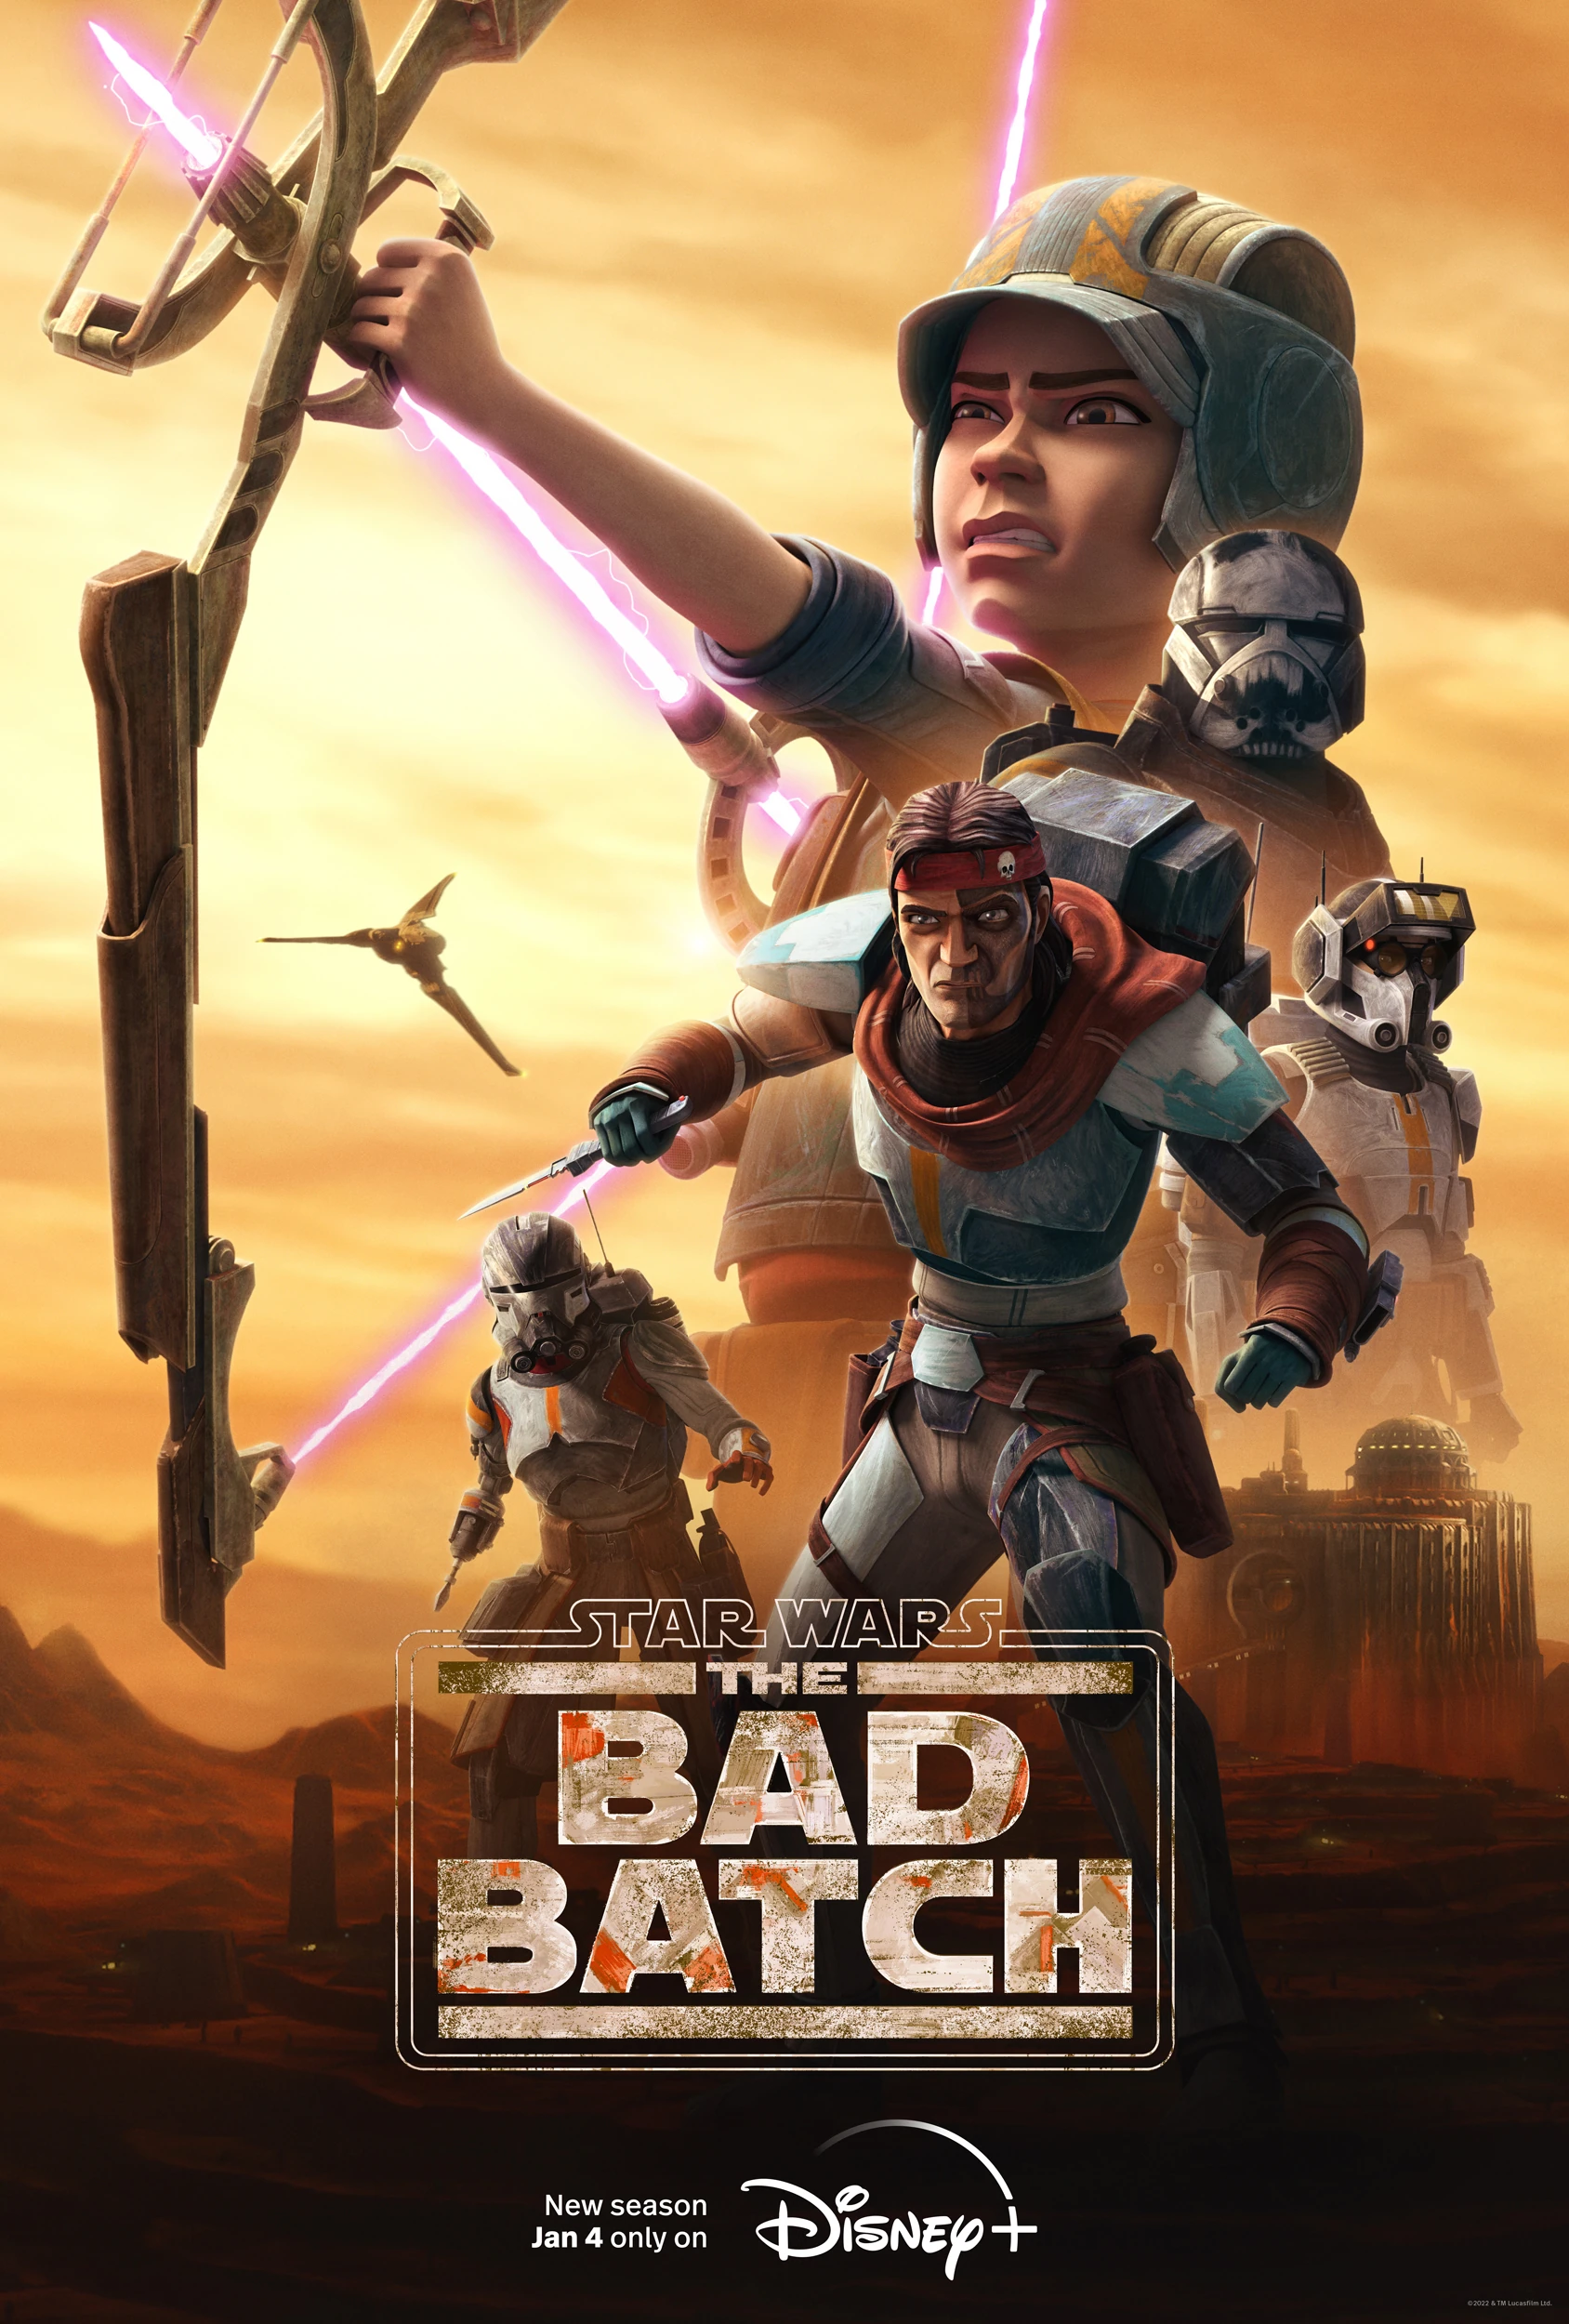 A poster of Star Wars: The Bad Batch season 2